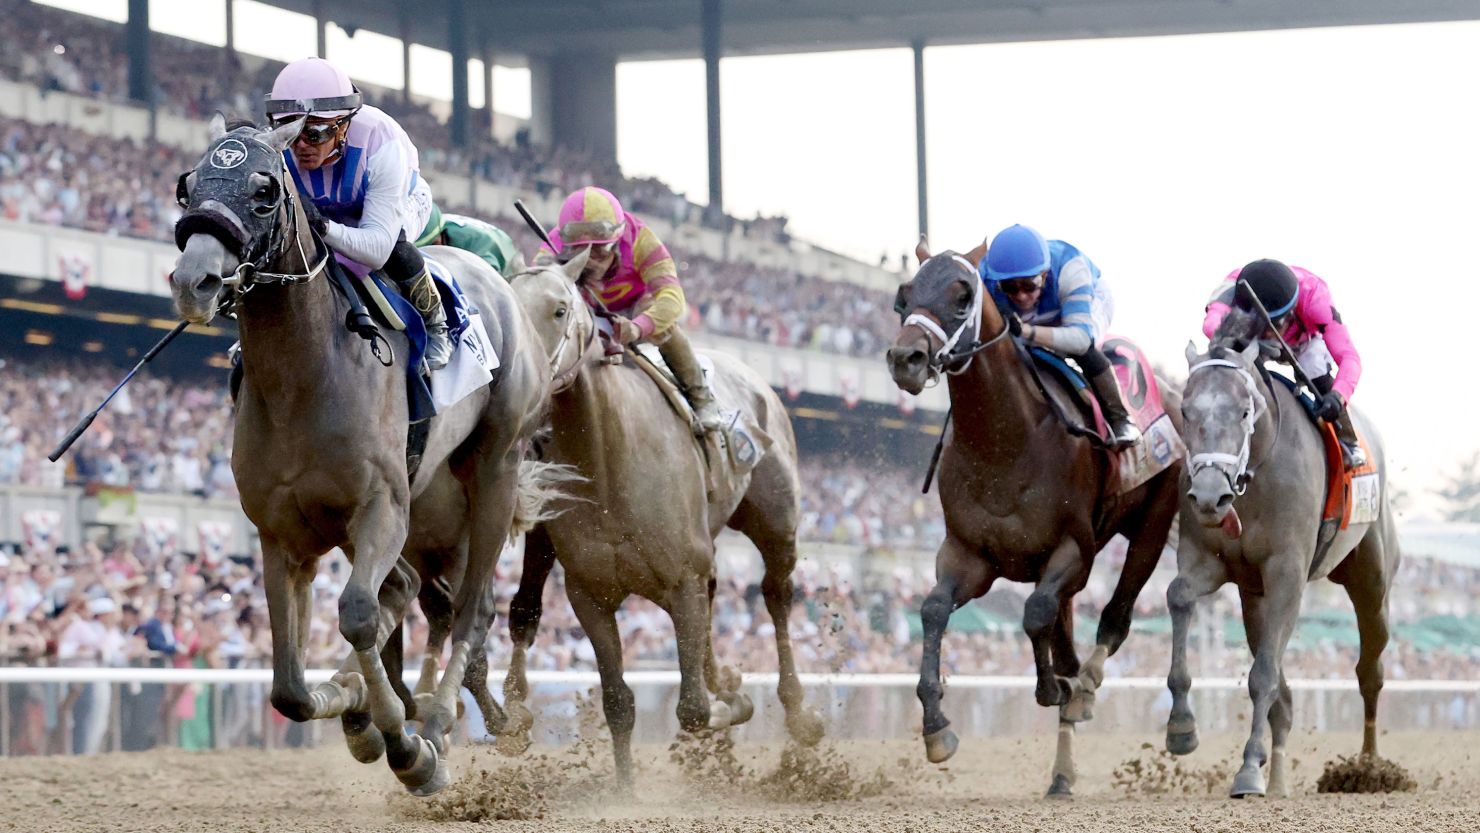 Arcangelo, ridden by jockey Javier Castellano, wins the 155th Belmont Stakes at Belmont Park, the finale of the Triple Crown. 